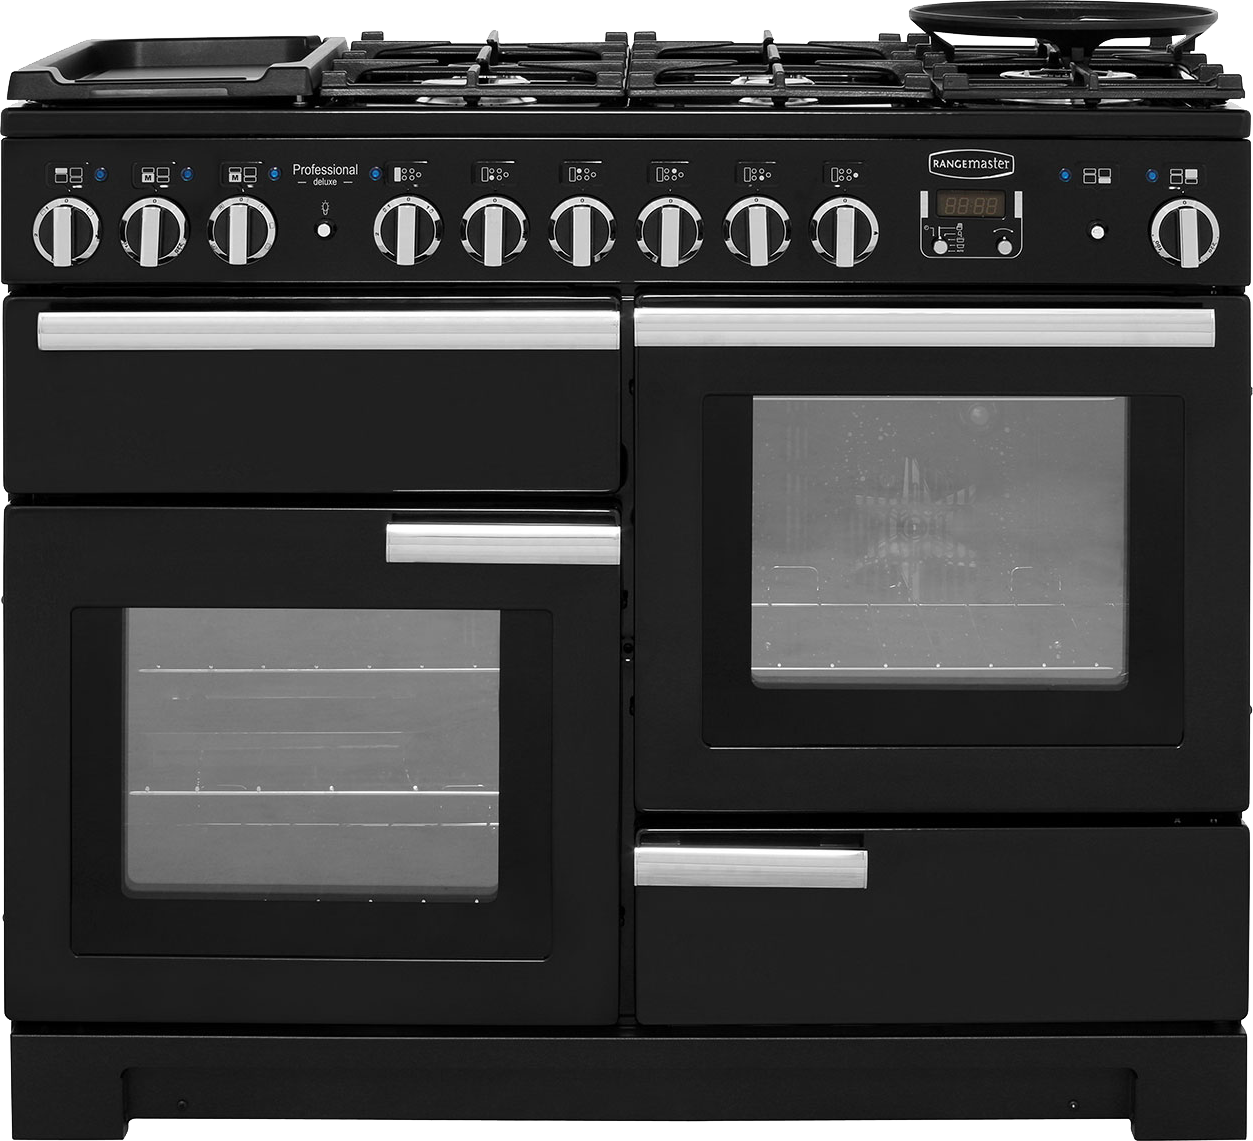 Rangemaster Professional Deluxe PDL110DFFGB/C 110cm Dual Fuel Range Cooker - Black - A/A Rated, Black